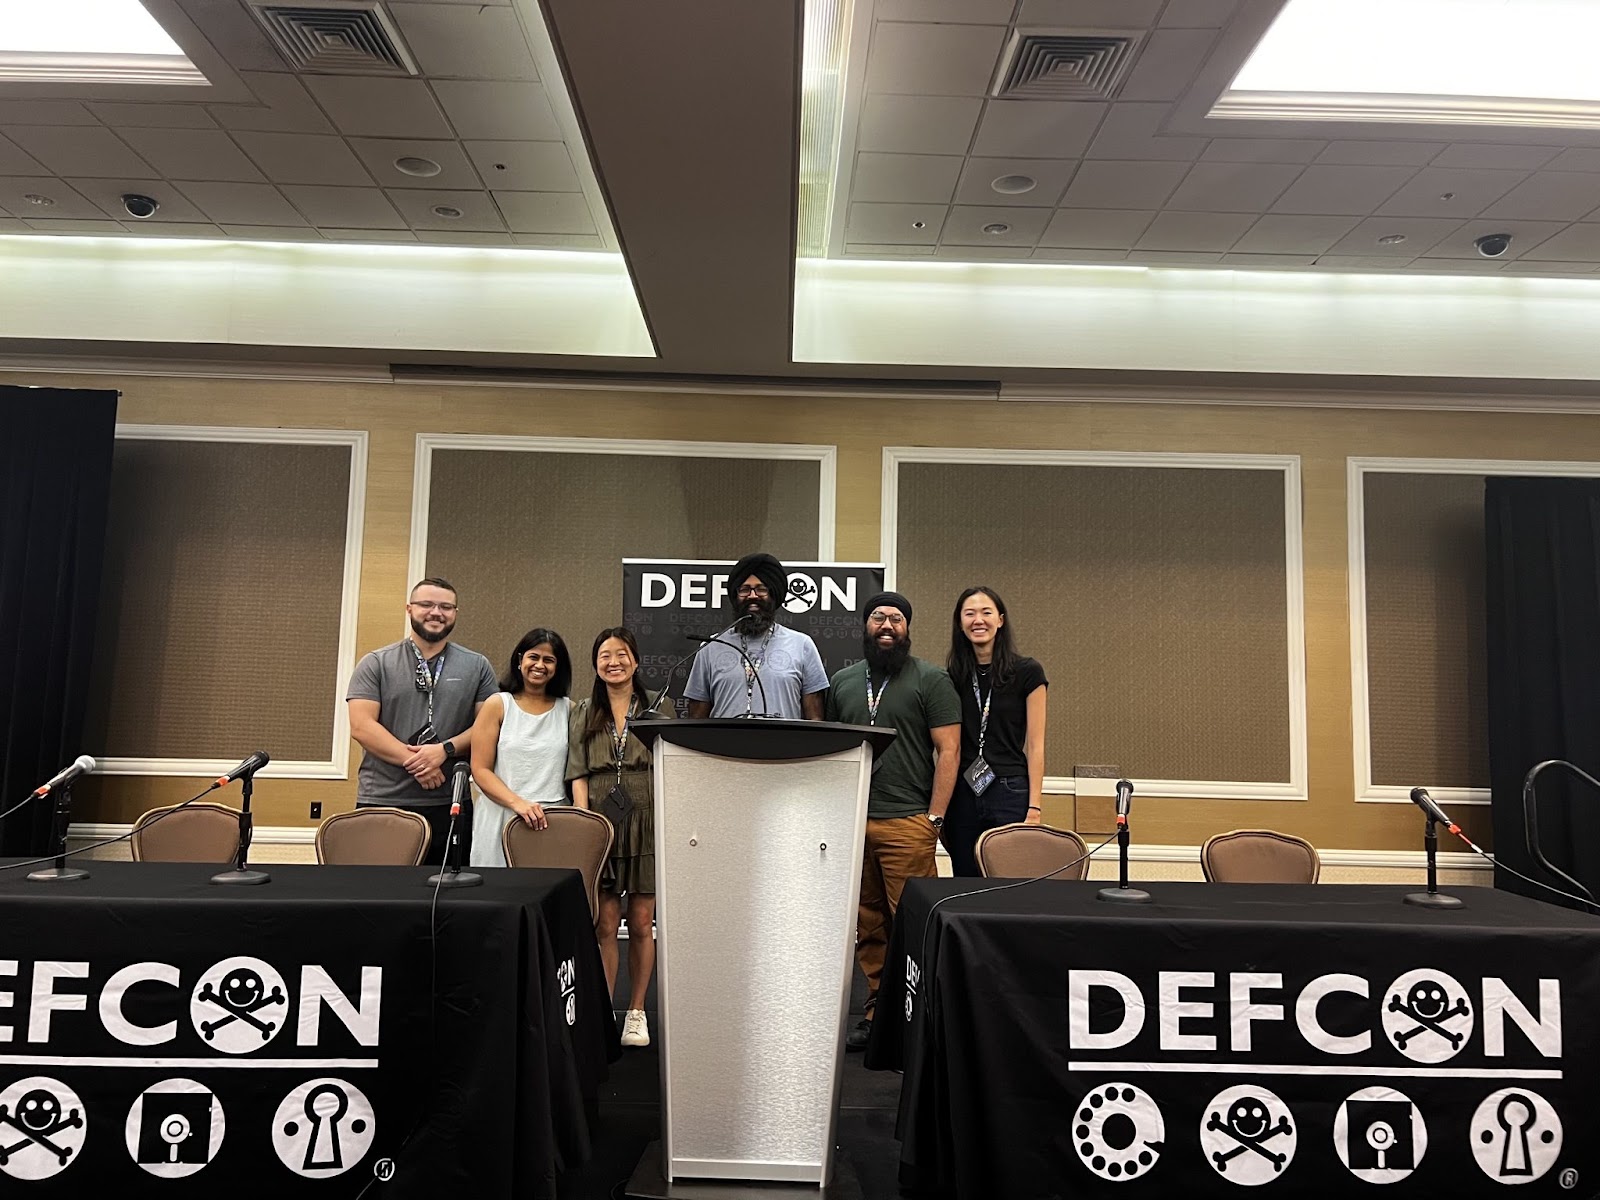 Twilio conference attendees at a DEFCON panel